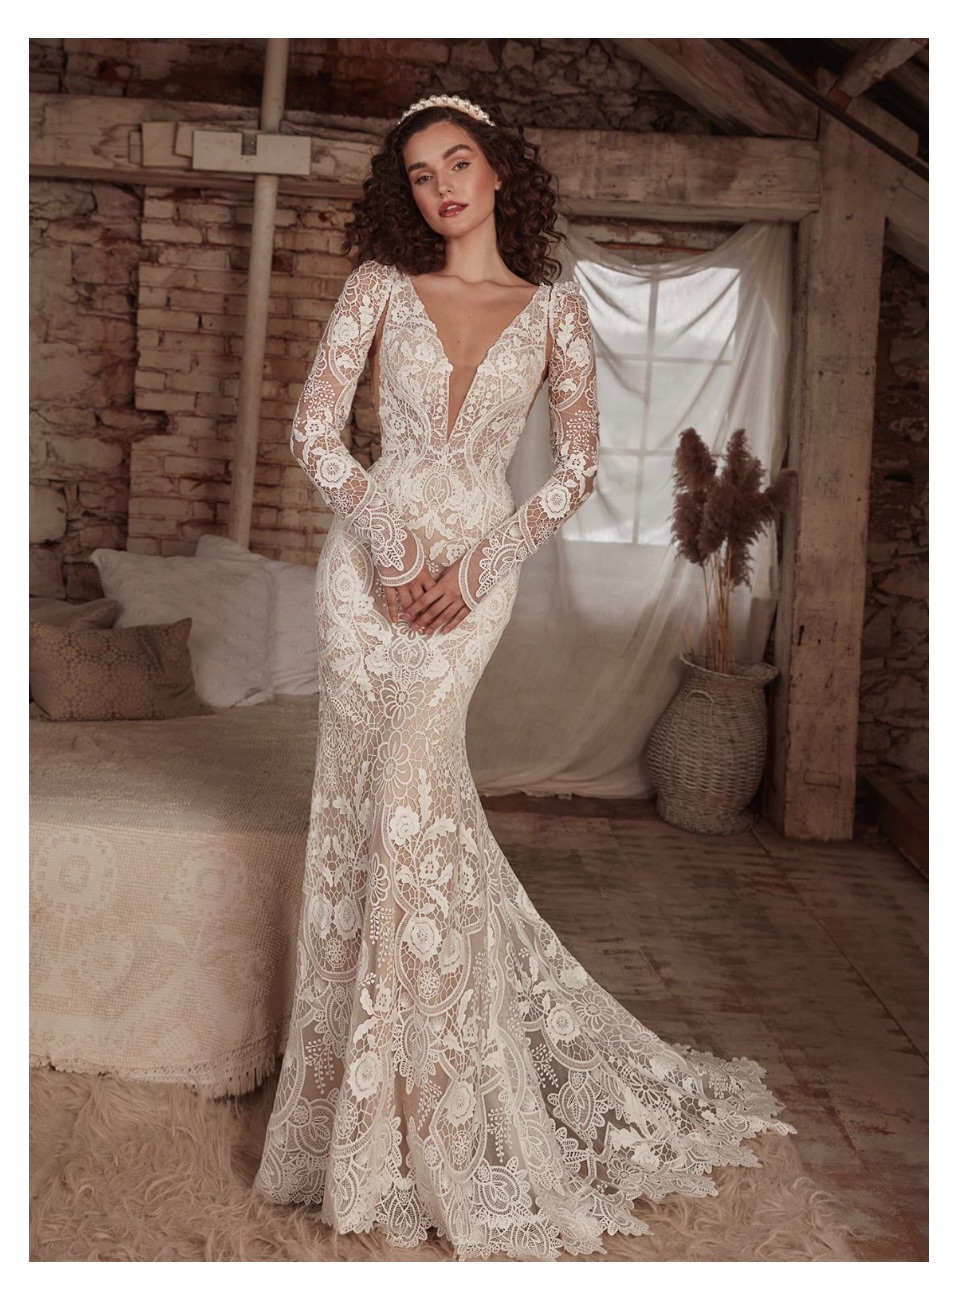 Holmes and Co Bridal Couture has joined UKbride